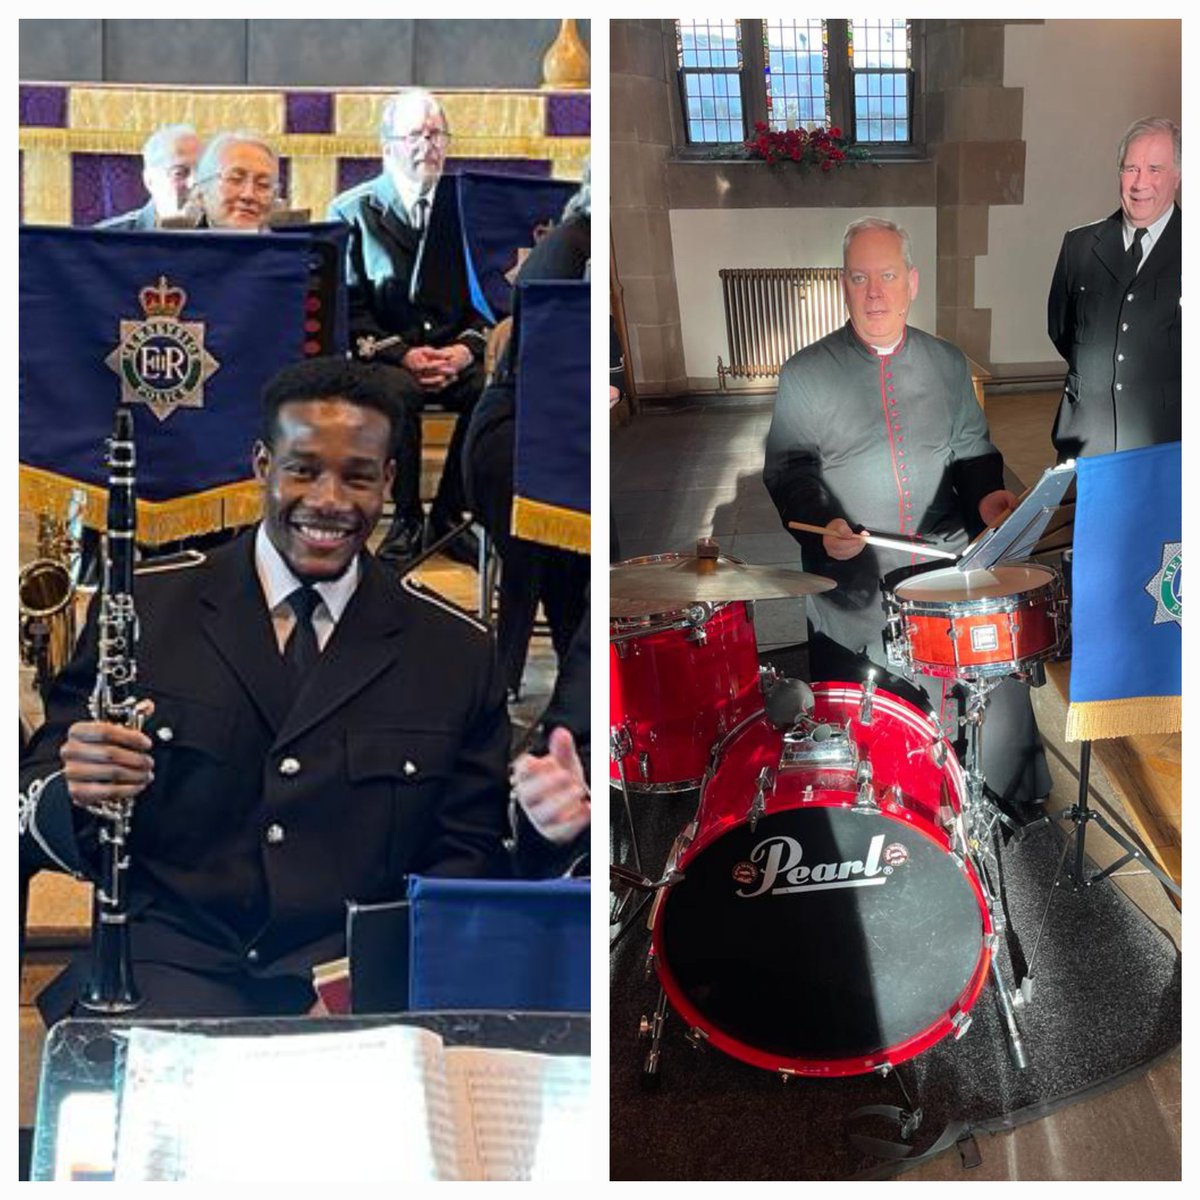 Parish Church staff now taking over @BandMerseyside. That's Fr @crispin_pailing on drums and our Parish Assistant, Derby, on the clarinet.